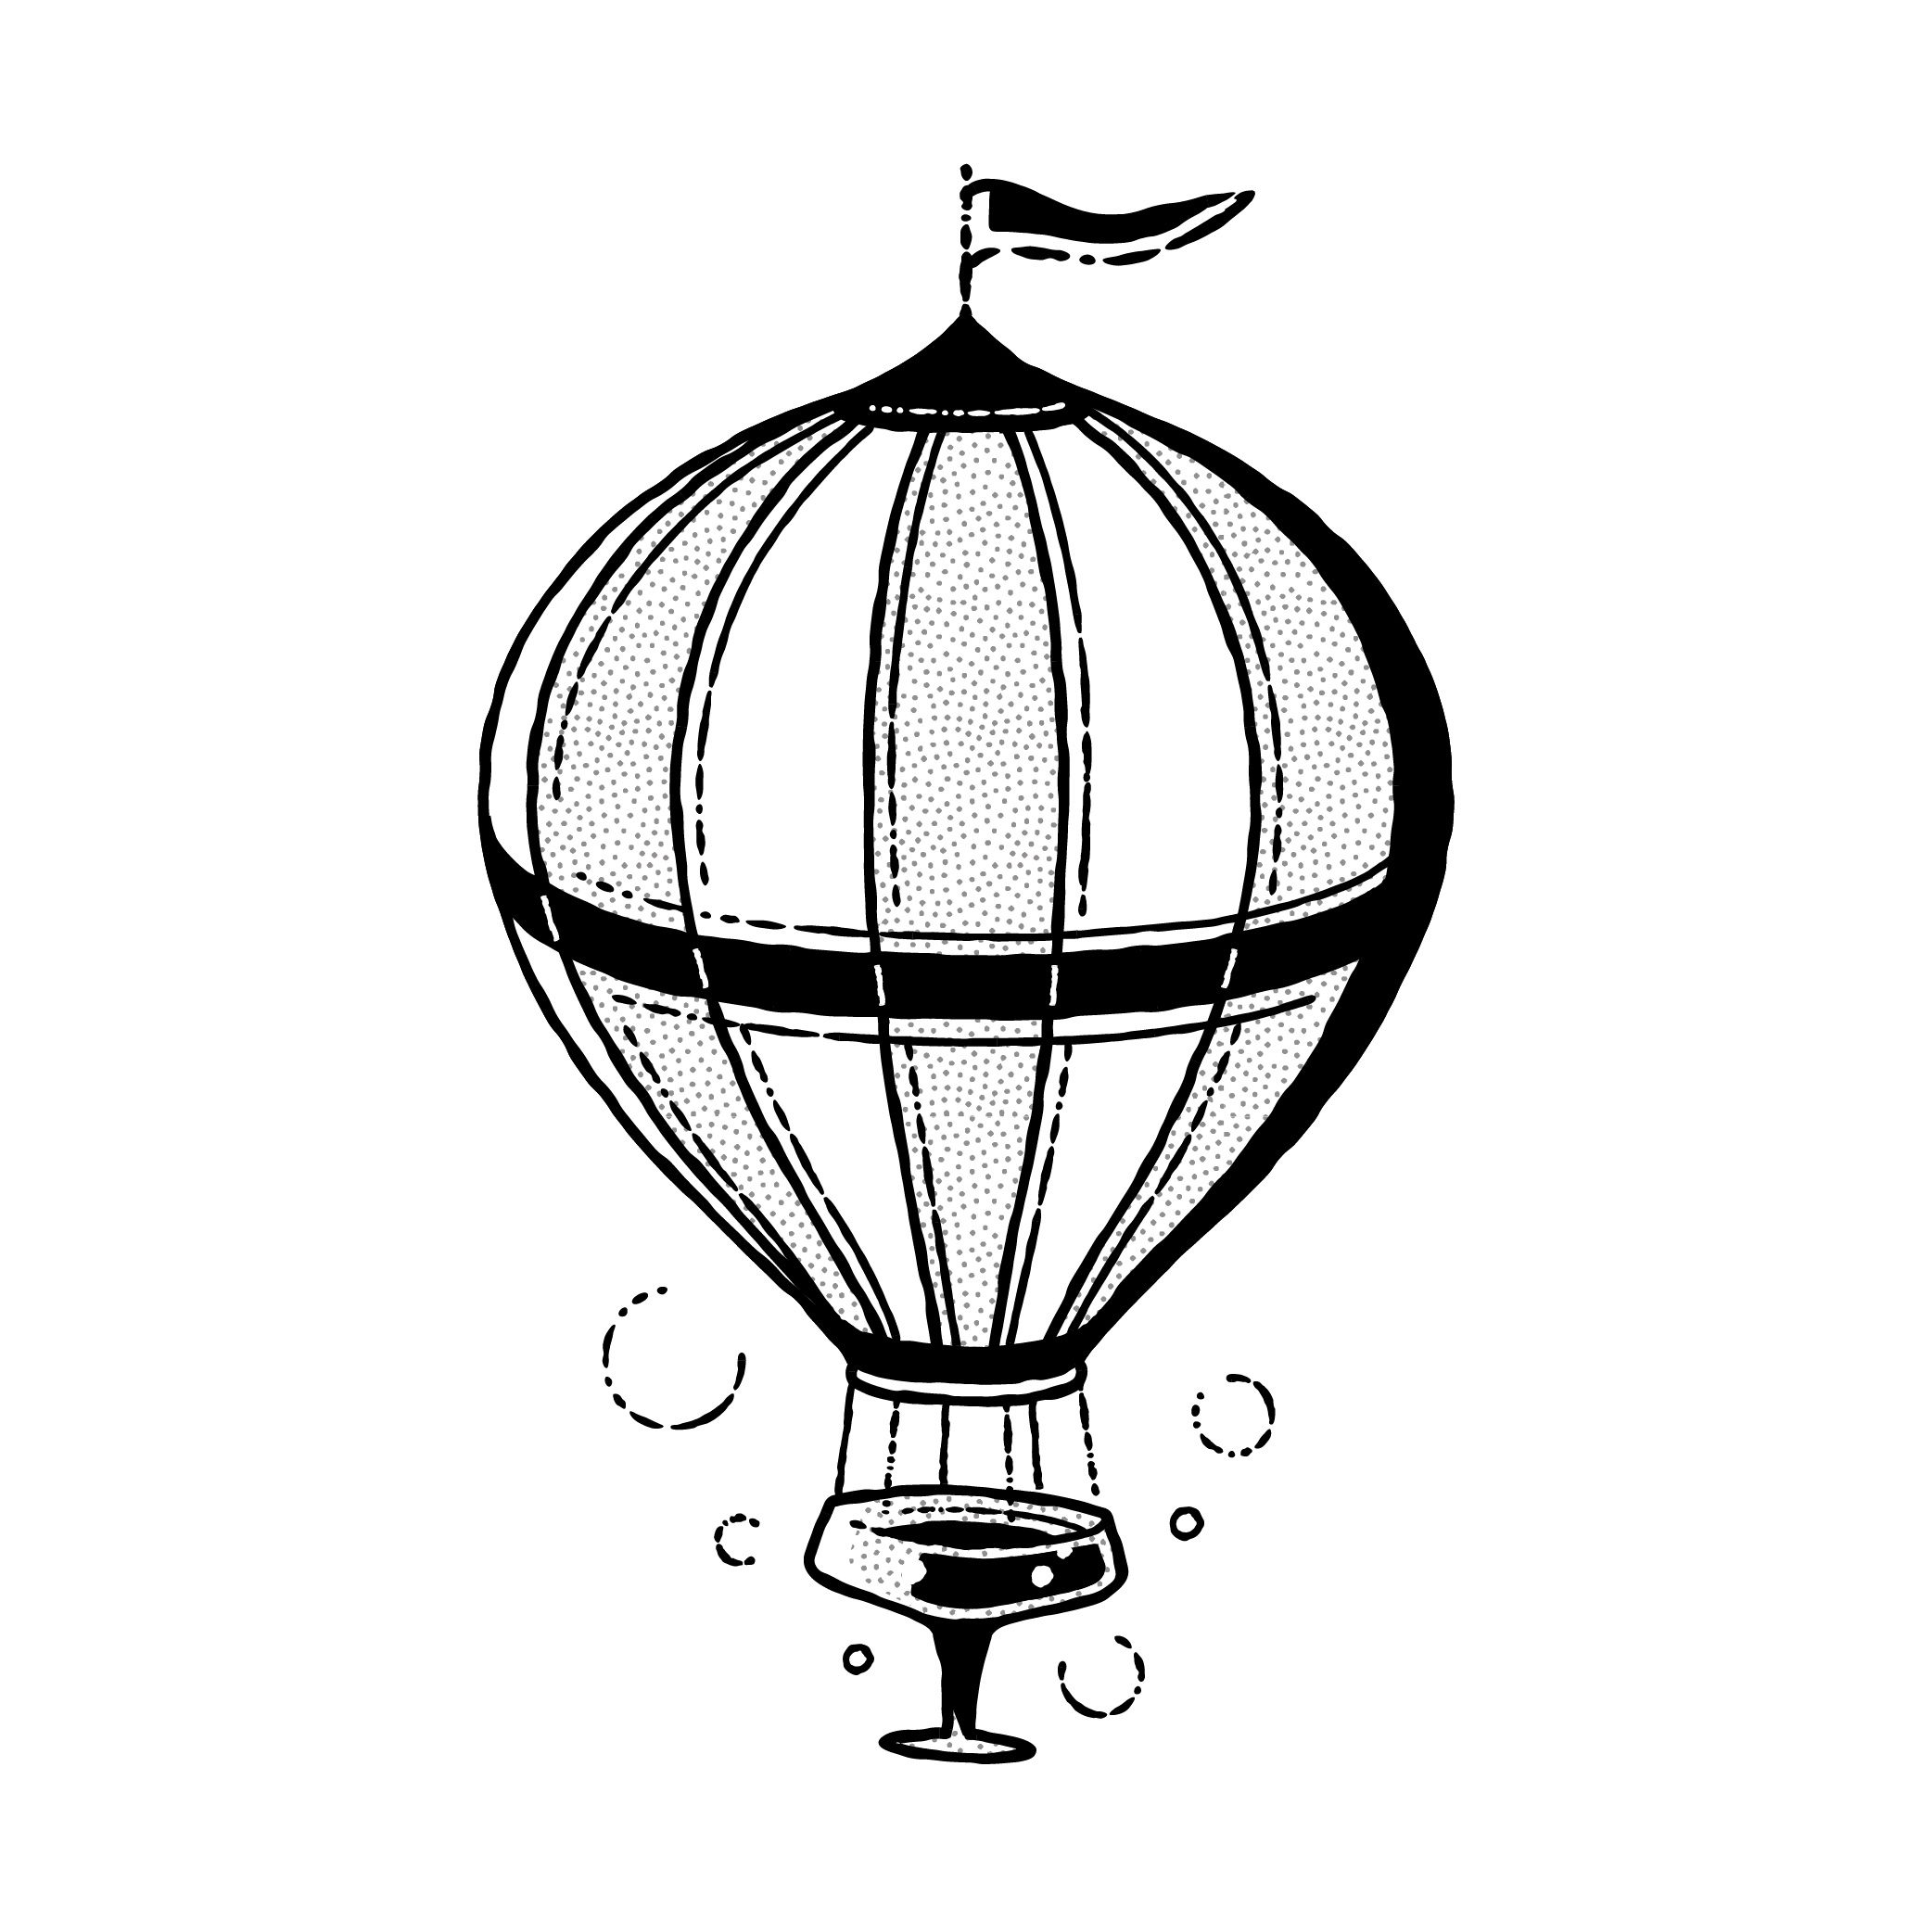 A black and white illustration of a hot air balloon. The balloon features vertical stripes and a basket beneath it. A small bird is perched on top of the balloon. The entire image has a textured, dotted pattern.